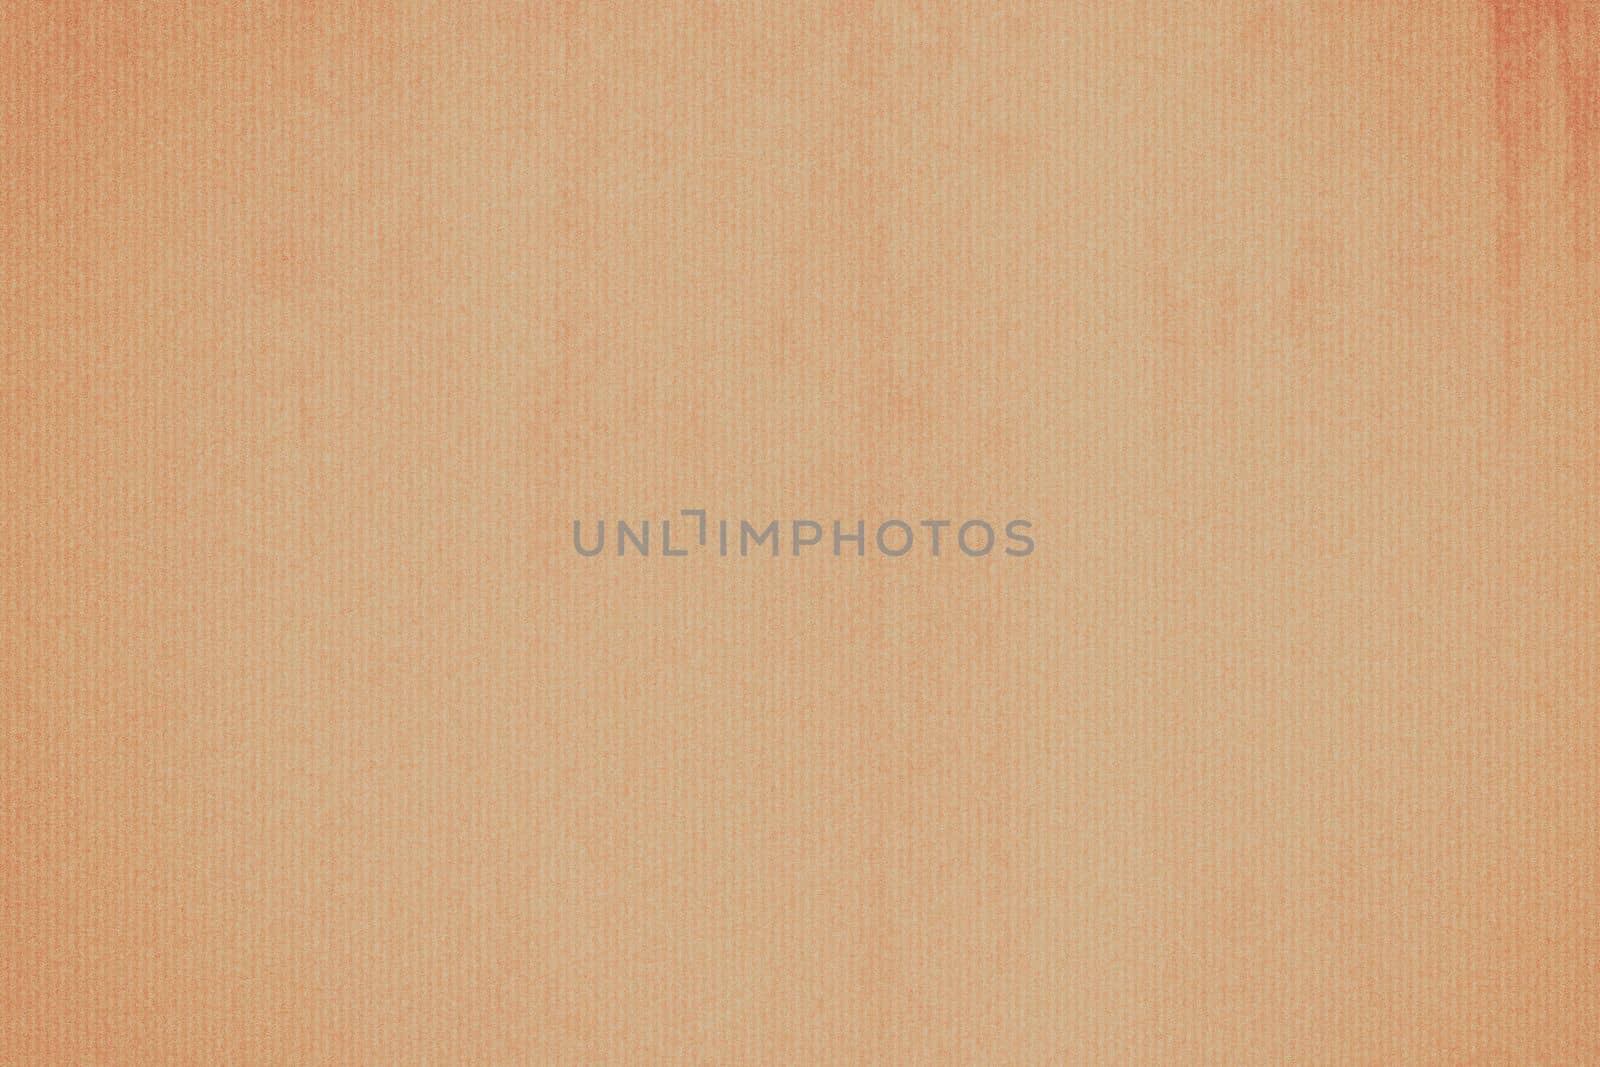 Abstract Old Grunge Cardboard with Vertical Stripes Texture Background.